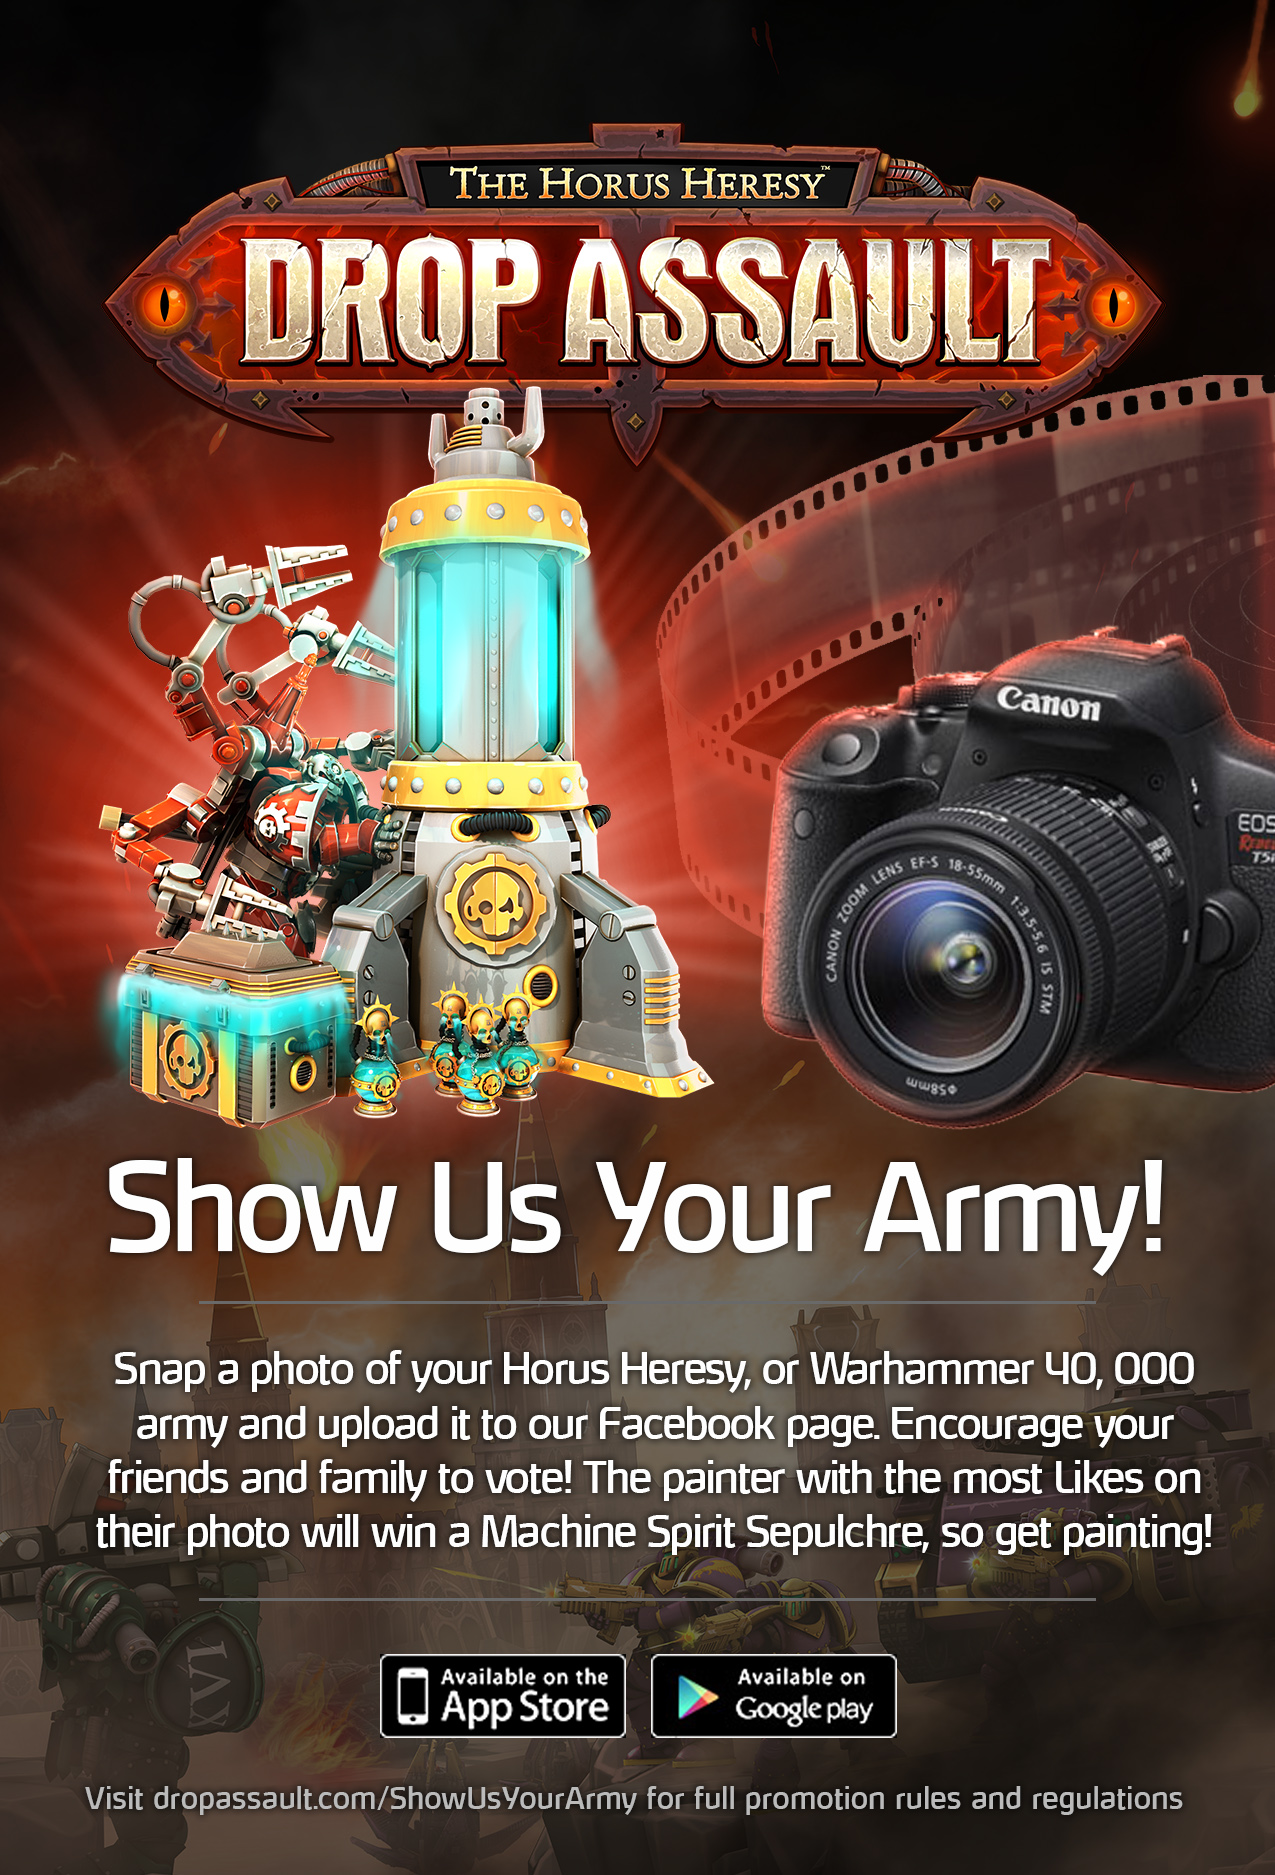 Show off your army to win